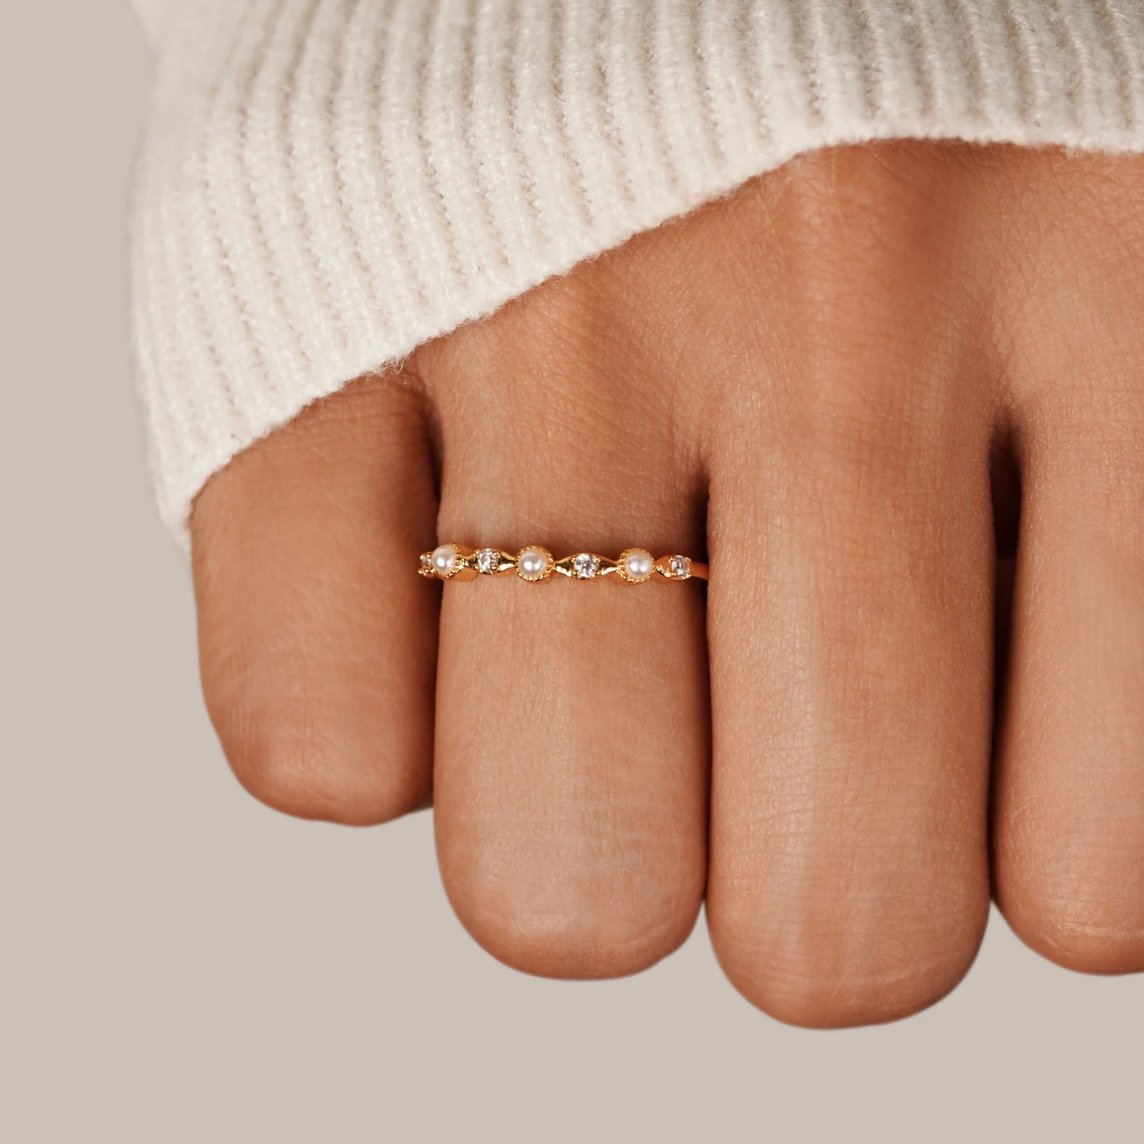 Elsa Pearl & Crystal Gold Ring - Beautiful Earth Boutique